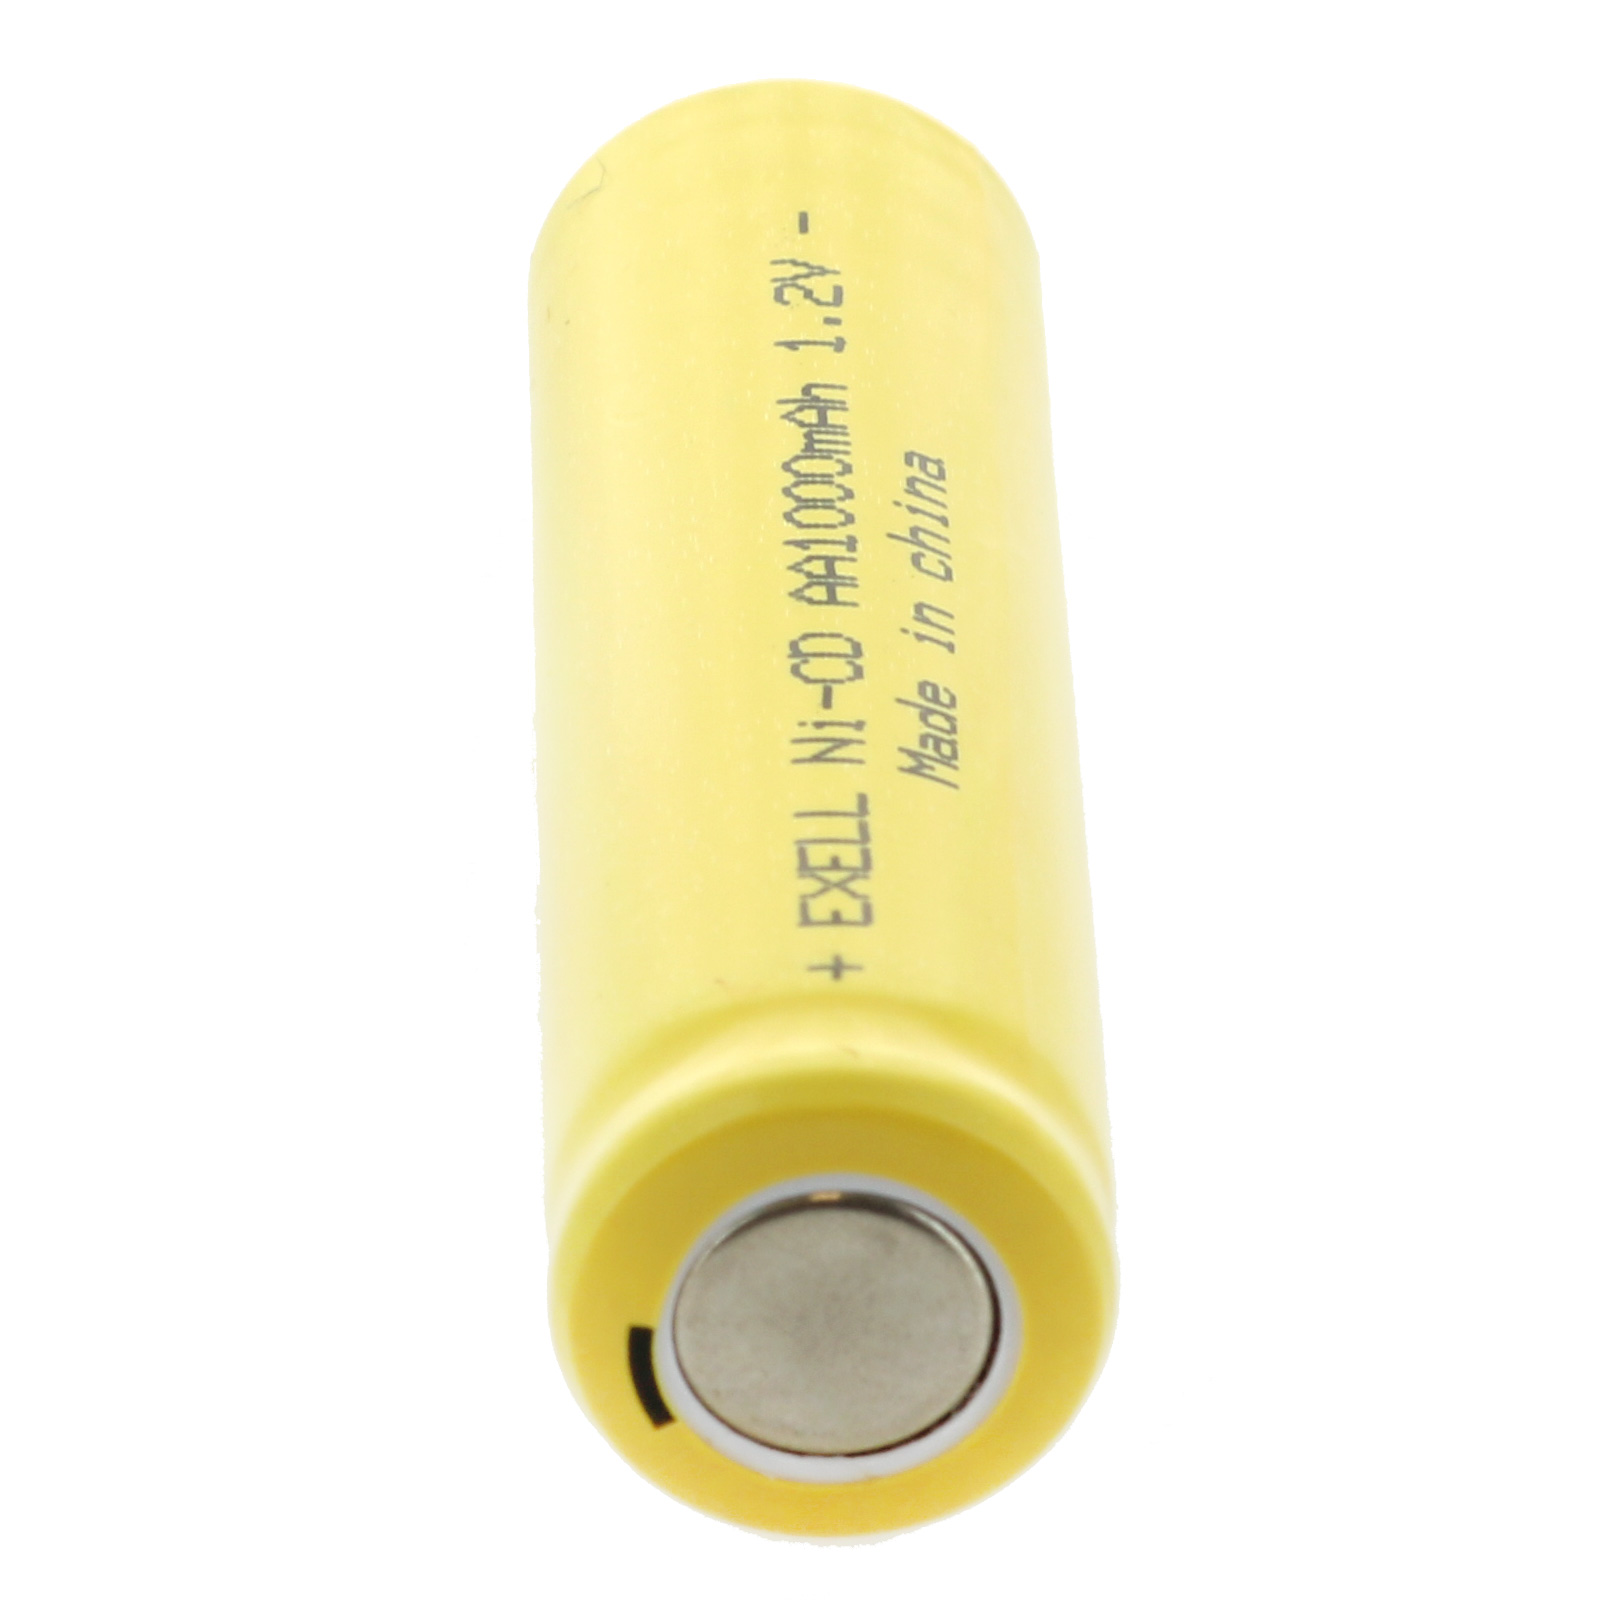 AA 1.2V 1000mAh Flat Top Rechargeable Battery for DIY, Radios, Power Packs - image 3 of 7